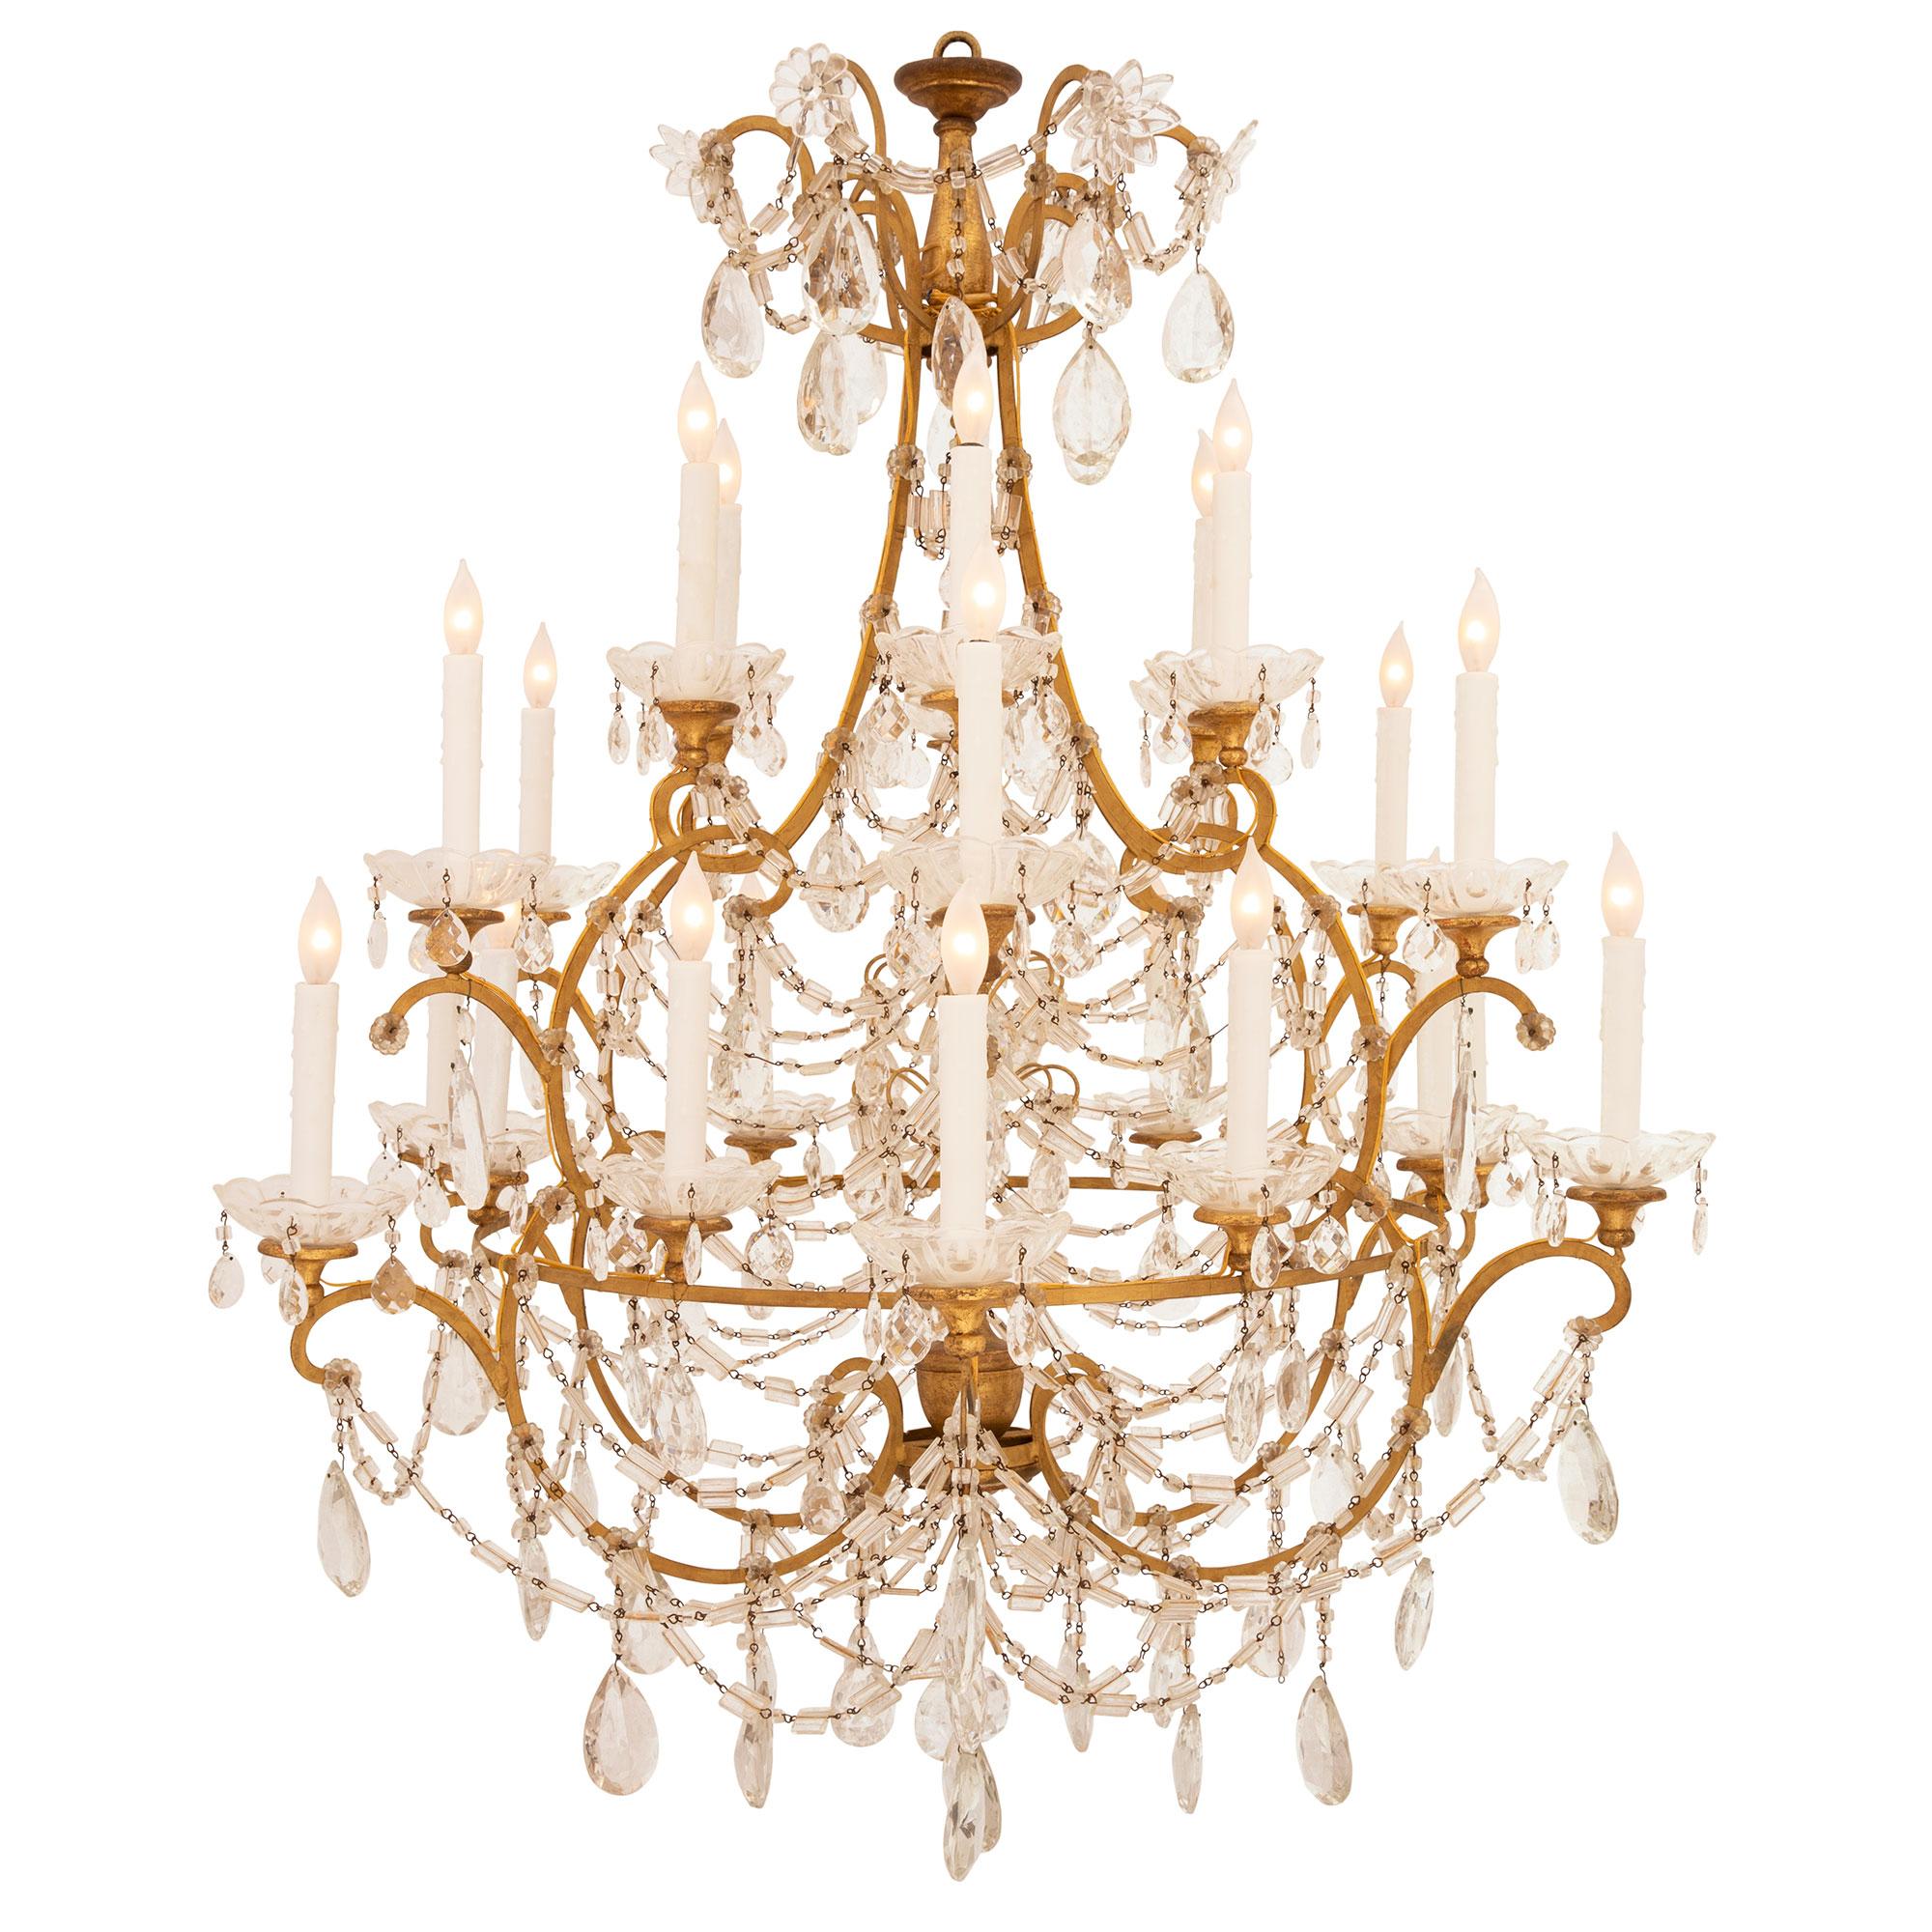 A sensational pair of Italian 19th century Louis XV st. gilt metal, giltwood, crystal and cut glass chandeliers. Each most impressive twenty four light chandelier is centered by a stunning array of most decorative cut crystal pendants amidst